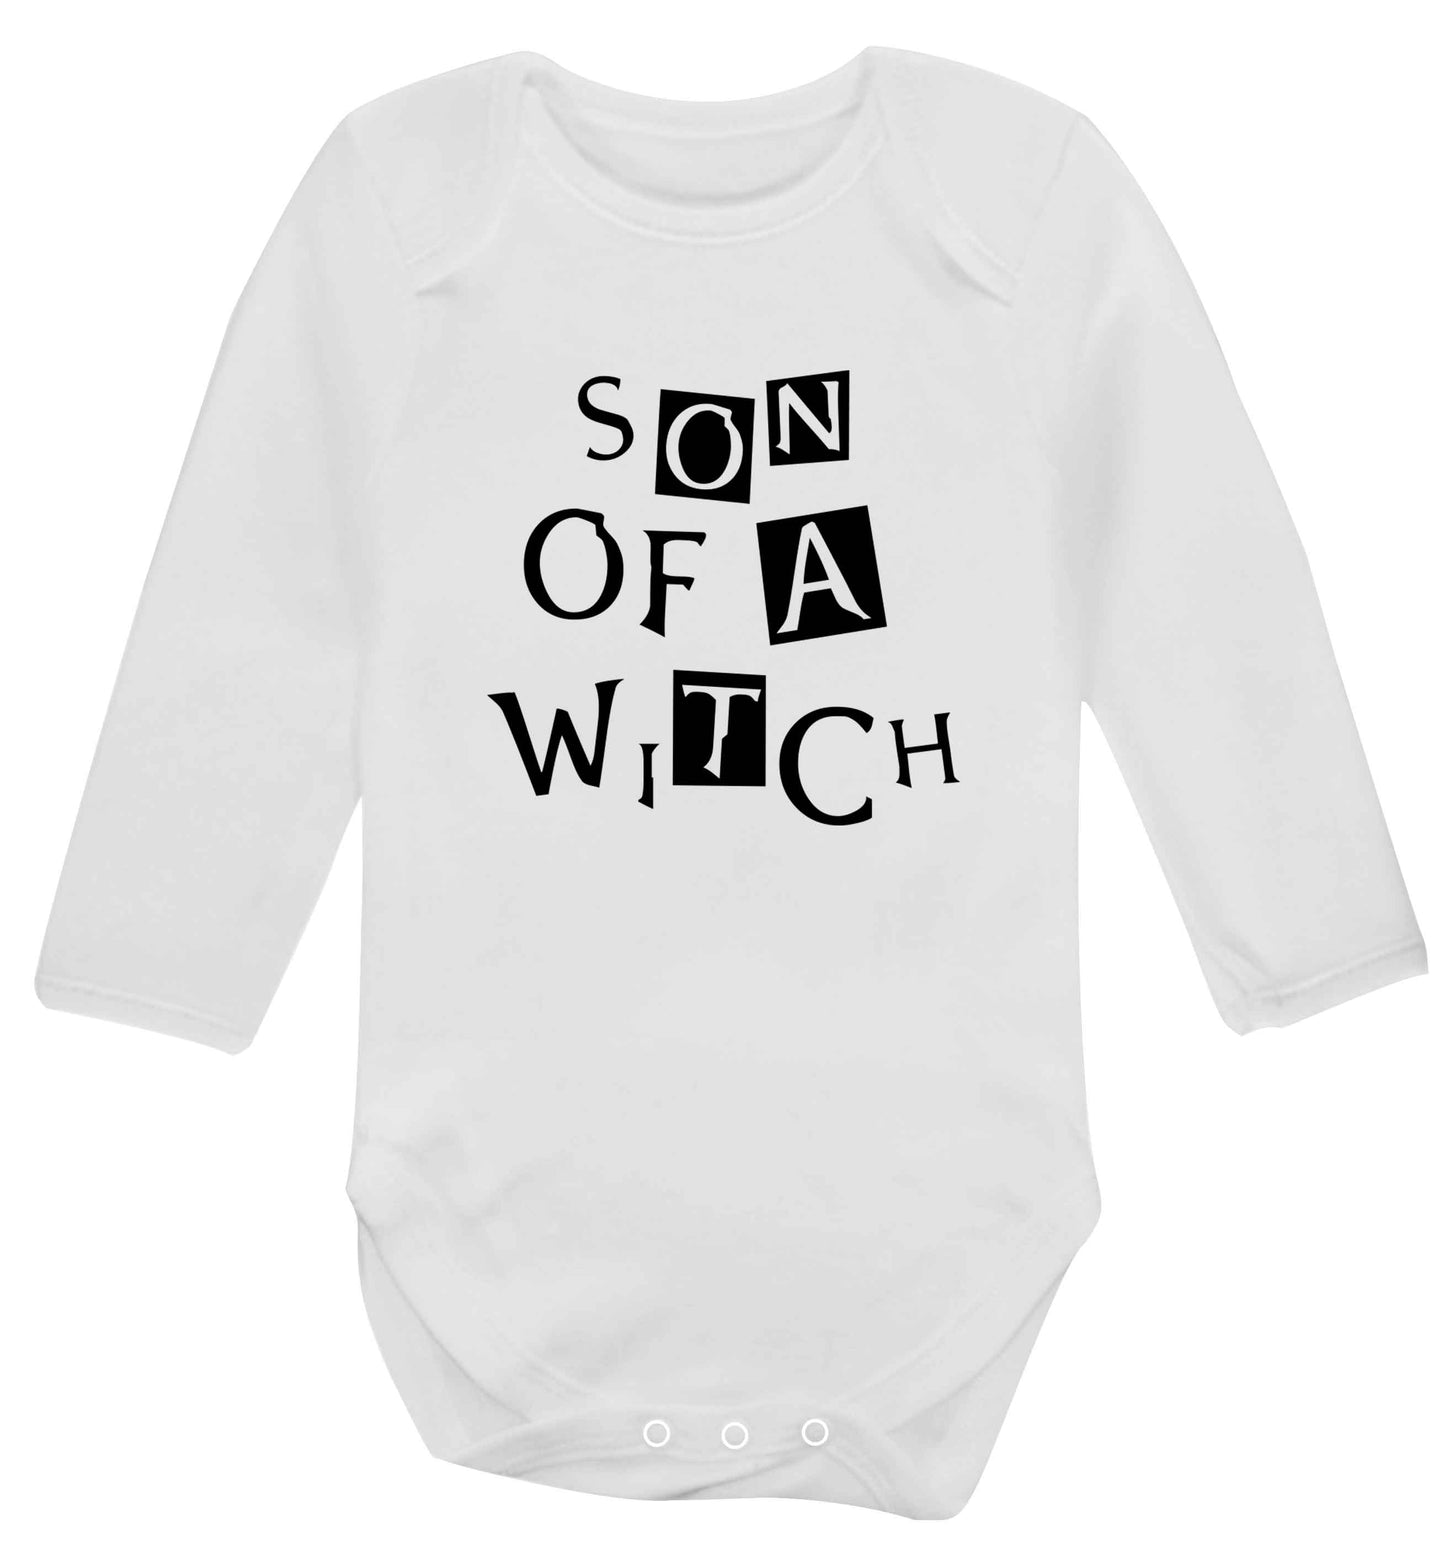 Son of a witch baby vest long sleeved white 6-12 months